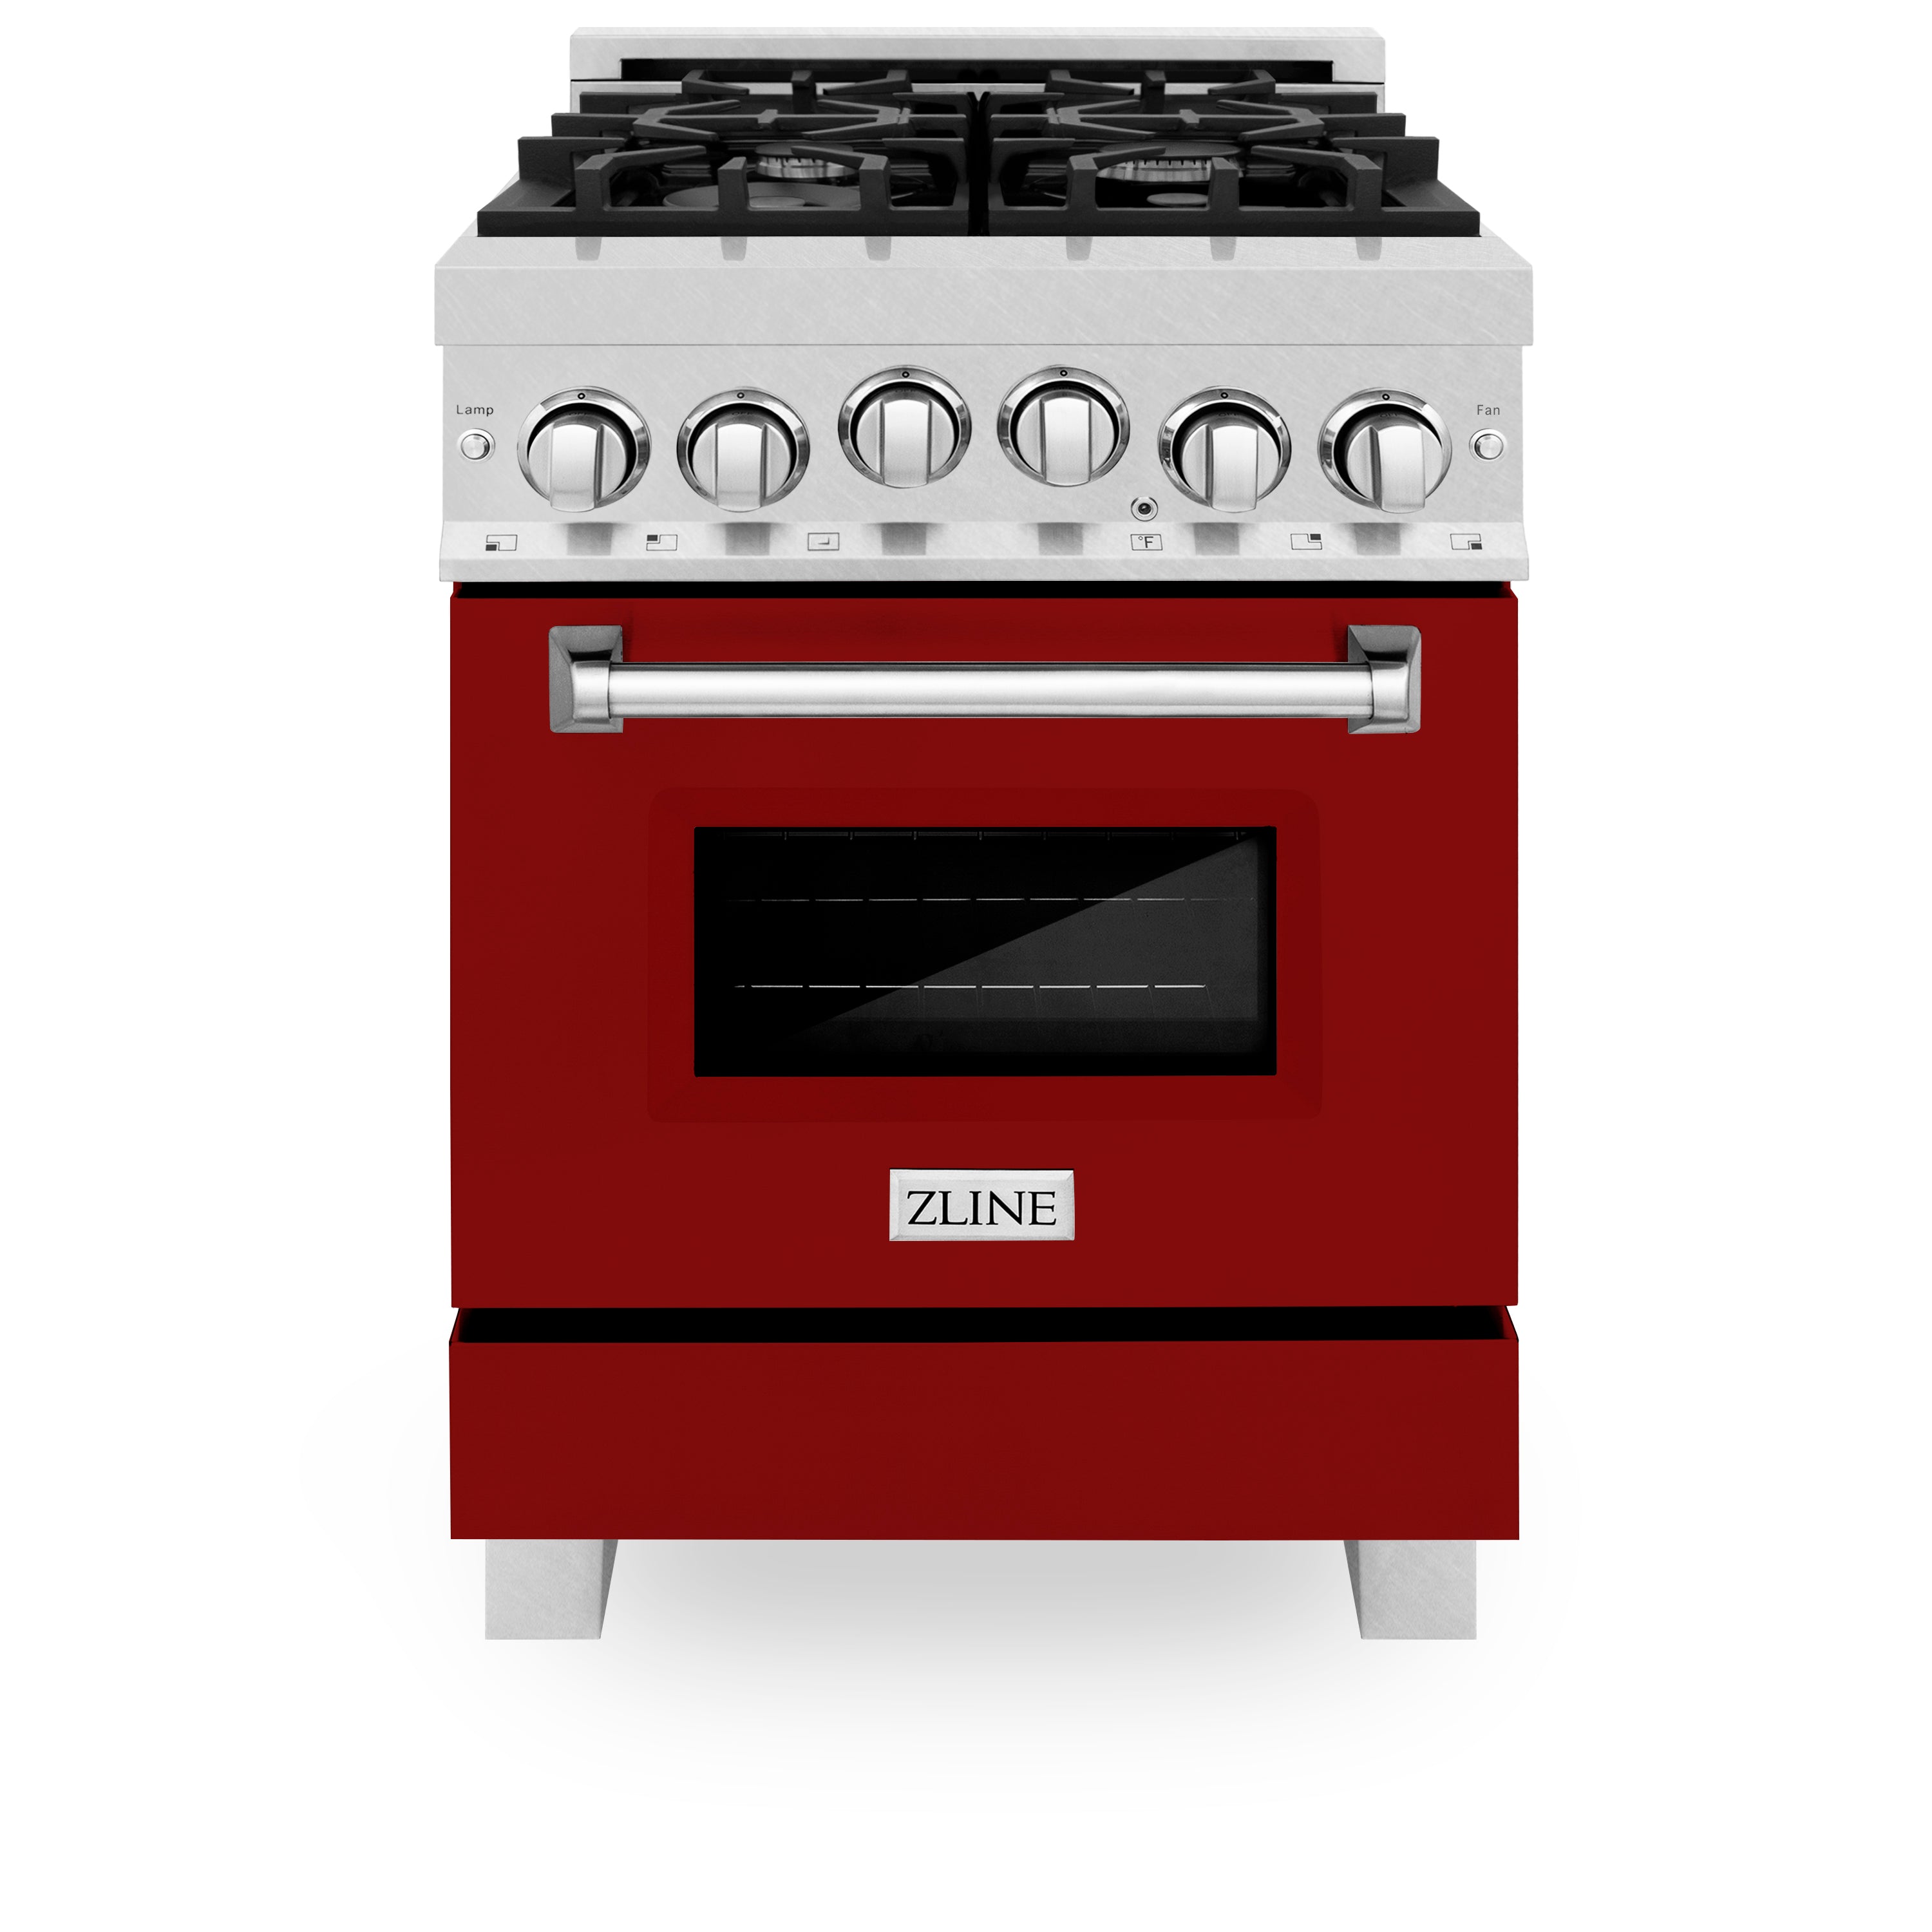 ZLINE 24" 2.8 cu. ft. Range with Gas Stove and Gas Oven in Fingerprint Resistant Stainless Steel and Red Gloss Door (RGS-RG-24)